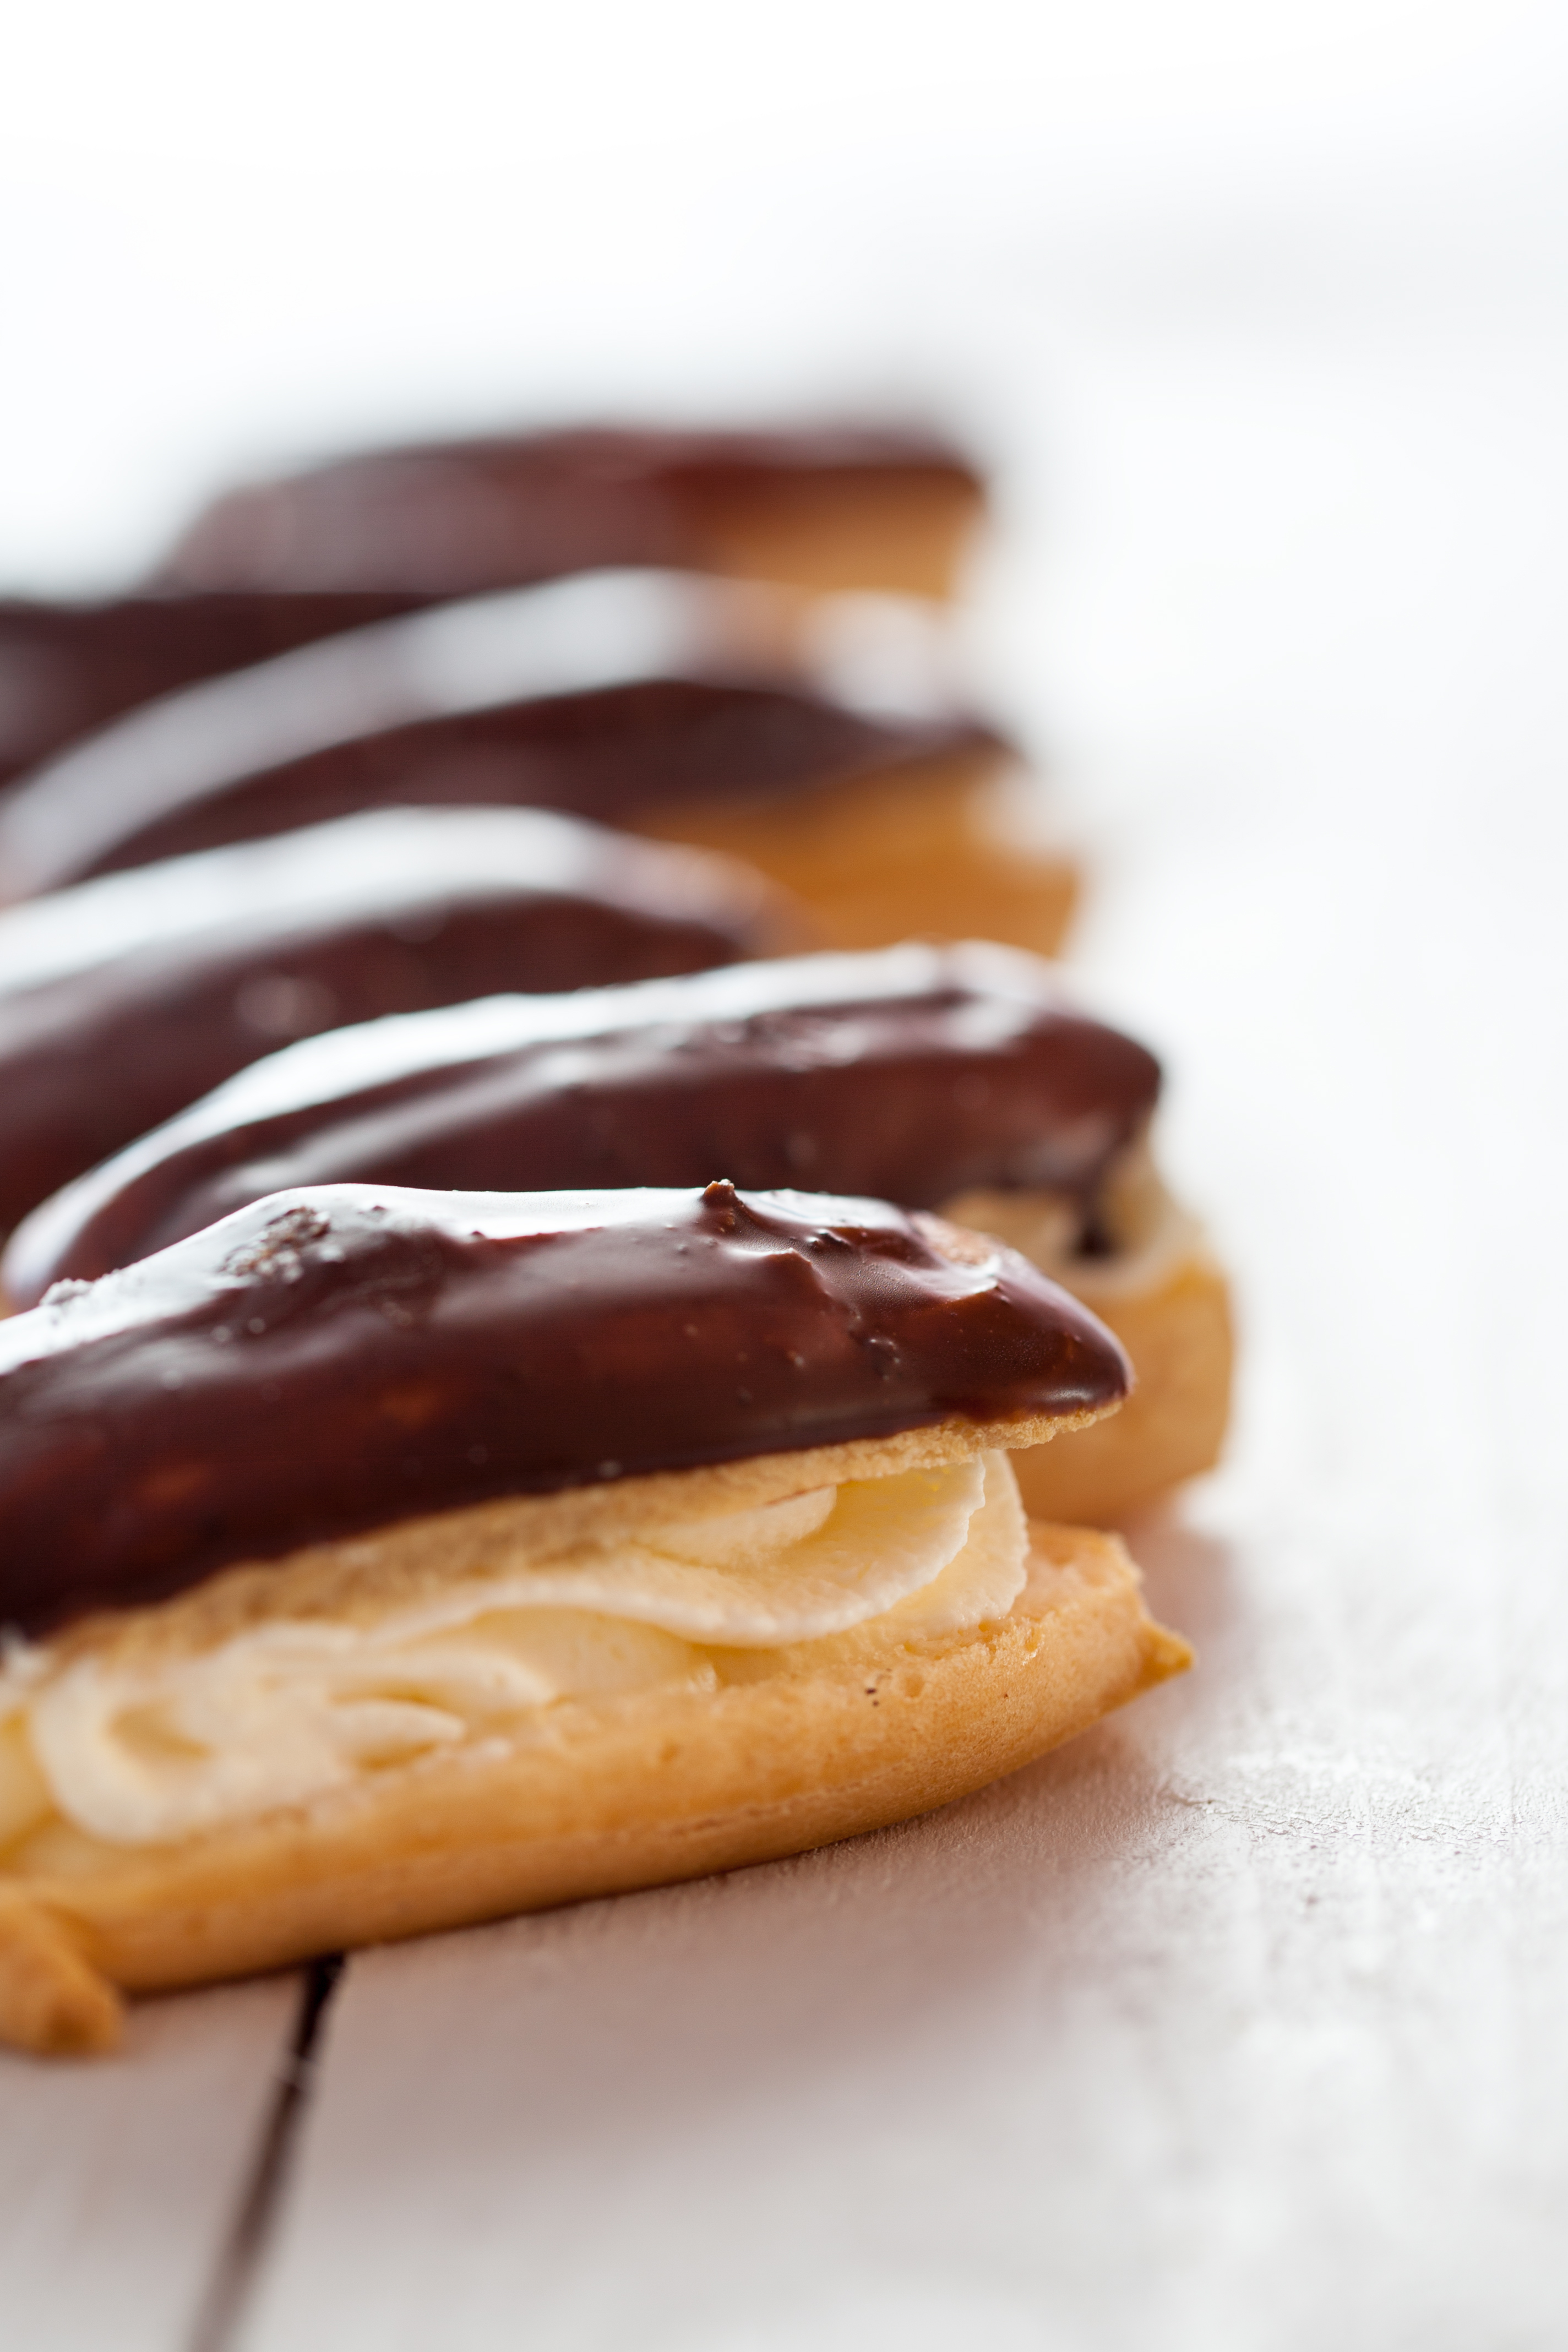 Chocolate Eclairs with Custard Filling